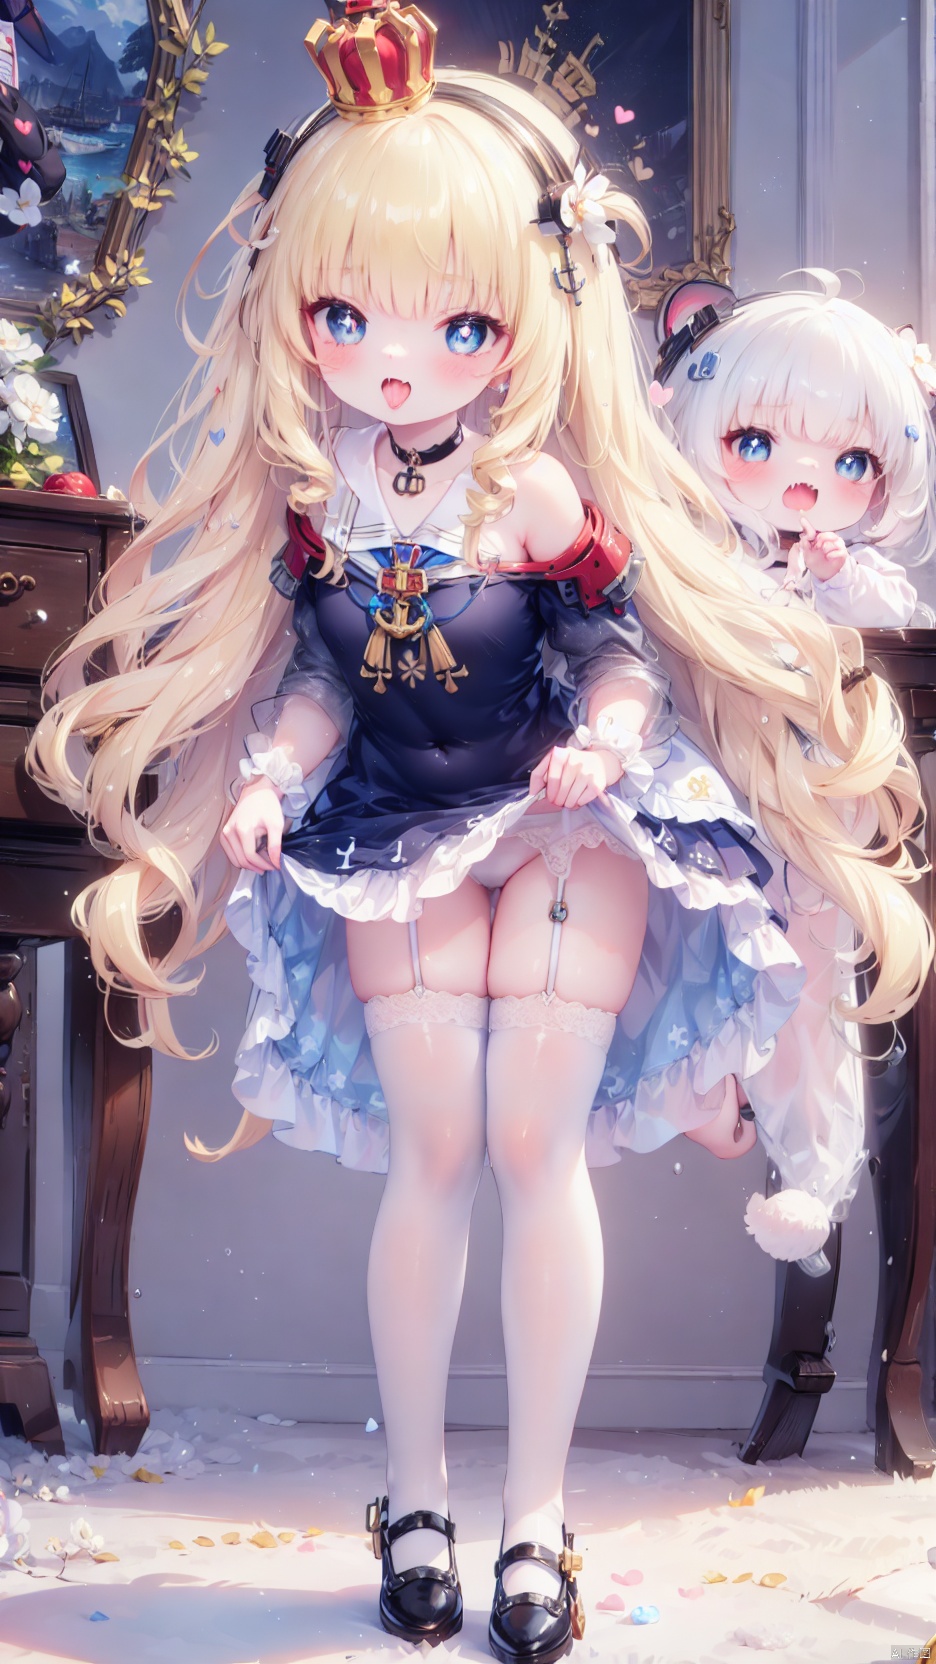 from below,queen elizabeth (azur lane),Little girl(1.5),aged down,beautiful detailed girl,narrow waist,Delicate cute face,princess crown,small crown,anchor choker,(anchor print naval uniform),blue princess dress,bare shoulders,ornate clothes,fine fabric emphasis,blue eyes,beautiful detailed eyes,Glowing eyes,((heart-shaped pupils)),((blonde hair)),((hair spread out,wavy hair)),very long shoulder,glowing hair,Extremely delicate hair,Thin leg,white legwear garter,black footwear,Slender fingers,steepled fingers,shiny nails,((clothes pull,**********)),ahegao(expression),smile,open mouth,tongue out,licking lips,drooling,heavy breathing,fangs out,big fangs,puffy cheeks,beautiful detailed mouth,looking down at viewer,anchor (ornament),warship,harbor,royal navy (emblem),royal navy flag,hyper realistic,magic,4k,incredible quality,best quality,masterpiece,highly detailed,extremely detailed CG,cinematic lighting,light particle,backlighting,full body,high definition,detail enhancement,(perfect hands, perfect anatomy),8k_wallpaper,extreme details,colorful